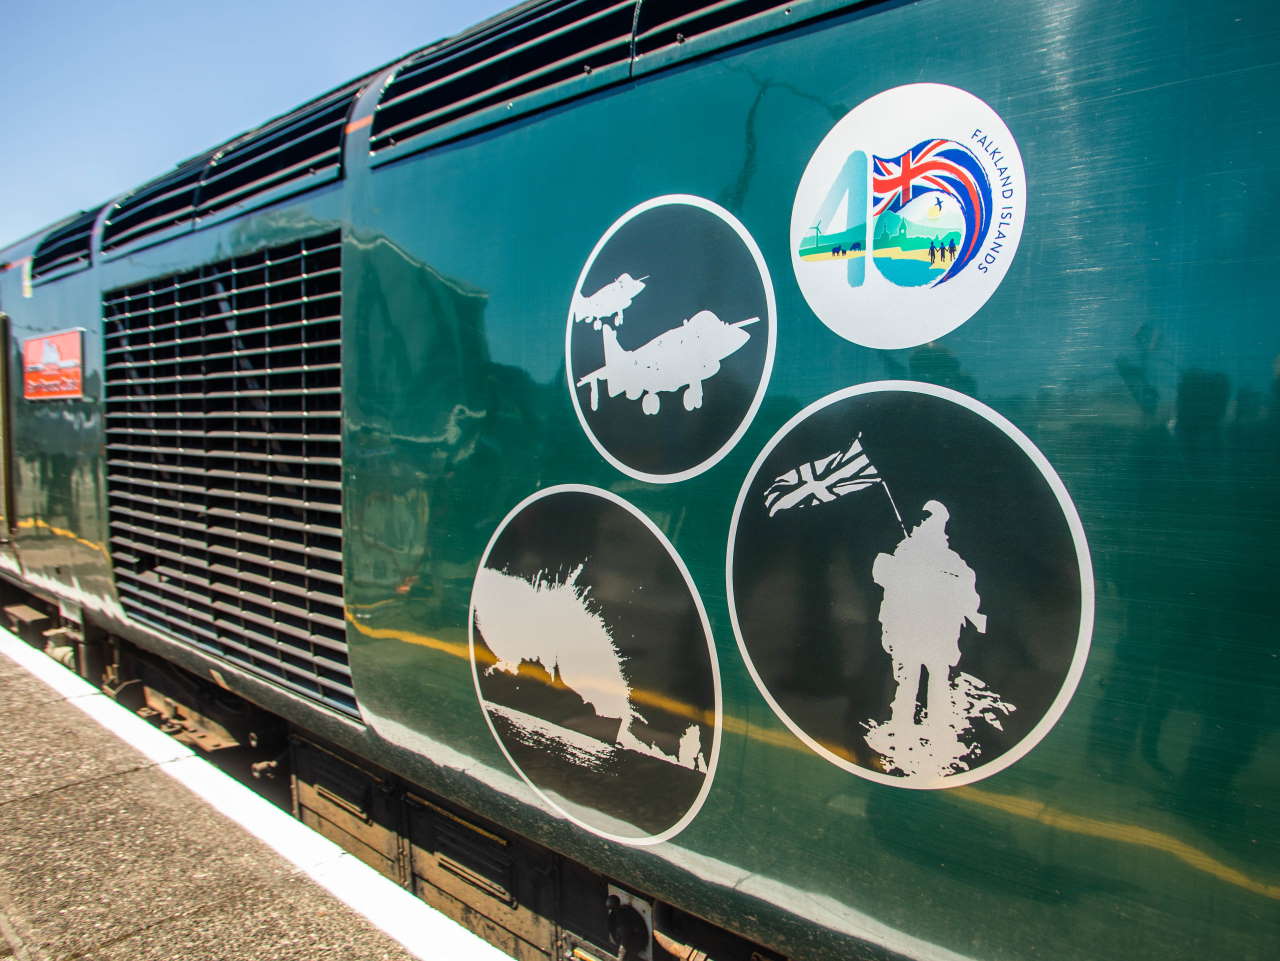 GWR dedicates train in tribute to those who served in Falklands War